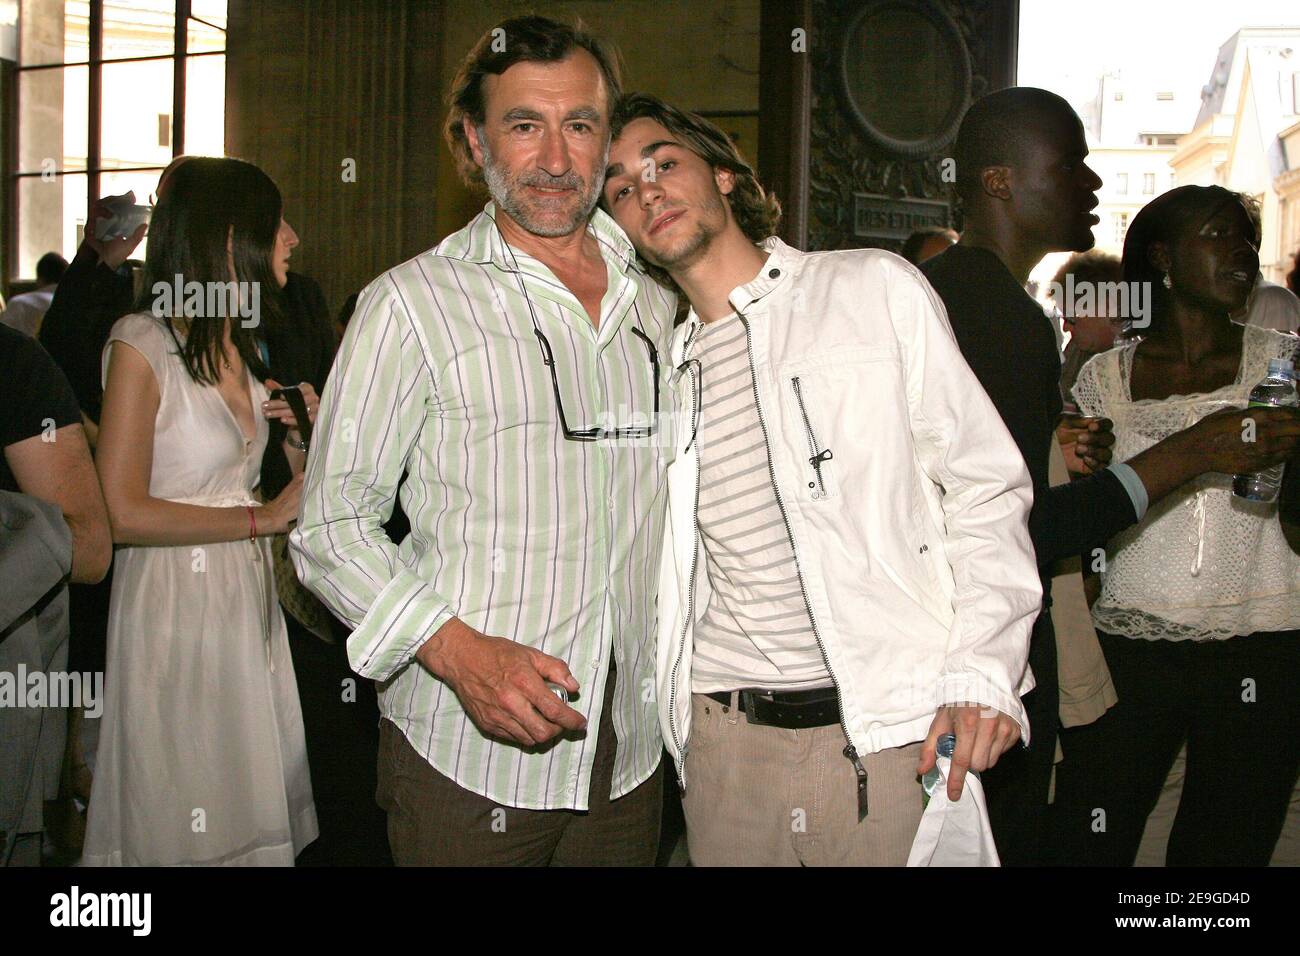 French actor Christophe Malavoy and his son Romain attend the Smalto Men Spring-Summer 2007 fashion show in Paris, France, on July 3, 2006. Photo by Nebinger-Taamallah/ABACAPRESS.COM Stock Photo